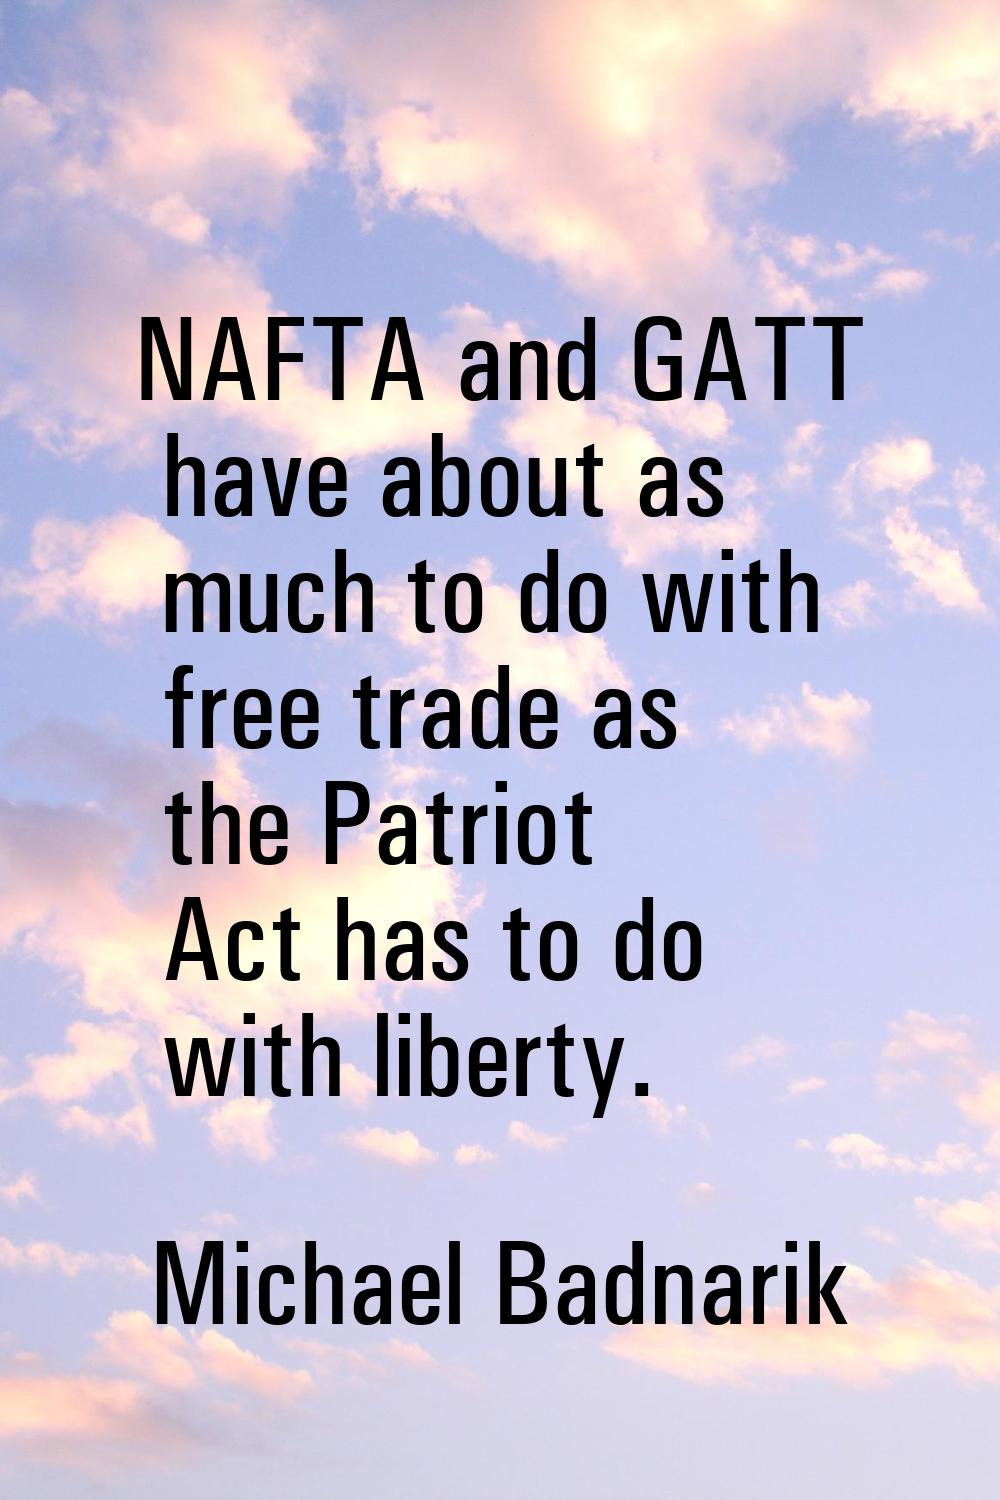 NAFTA and GATT have about as much to do with free trade as the Patriot Act has to do with liberty.